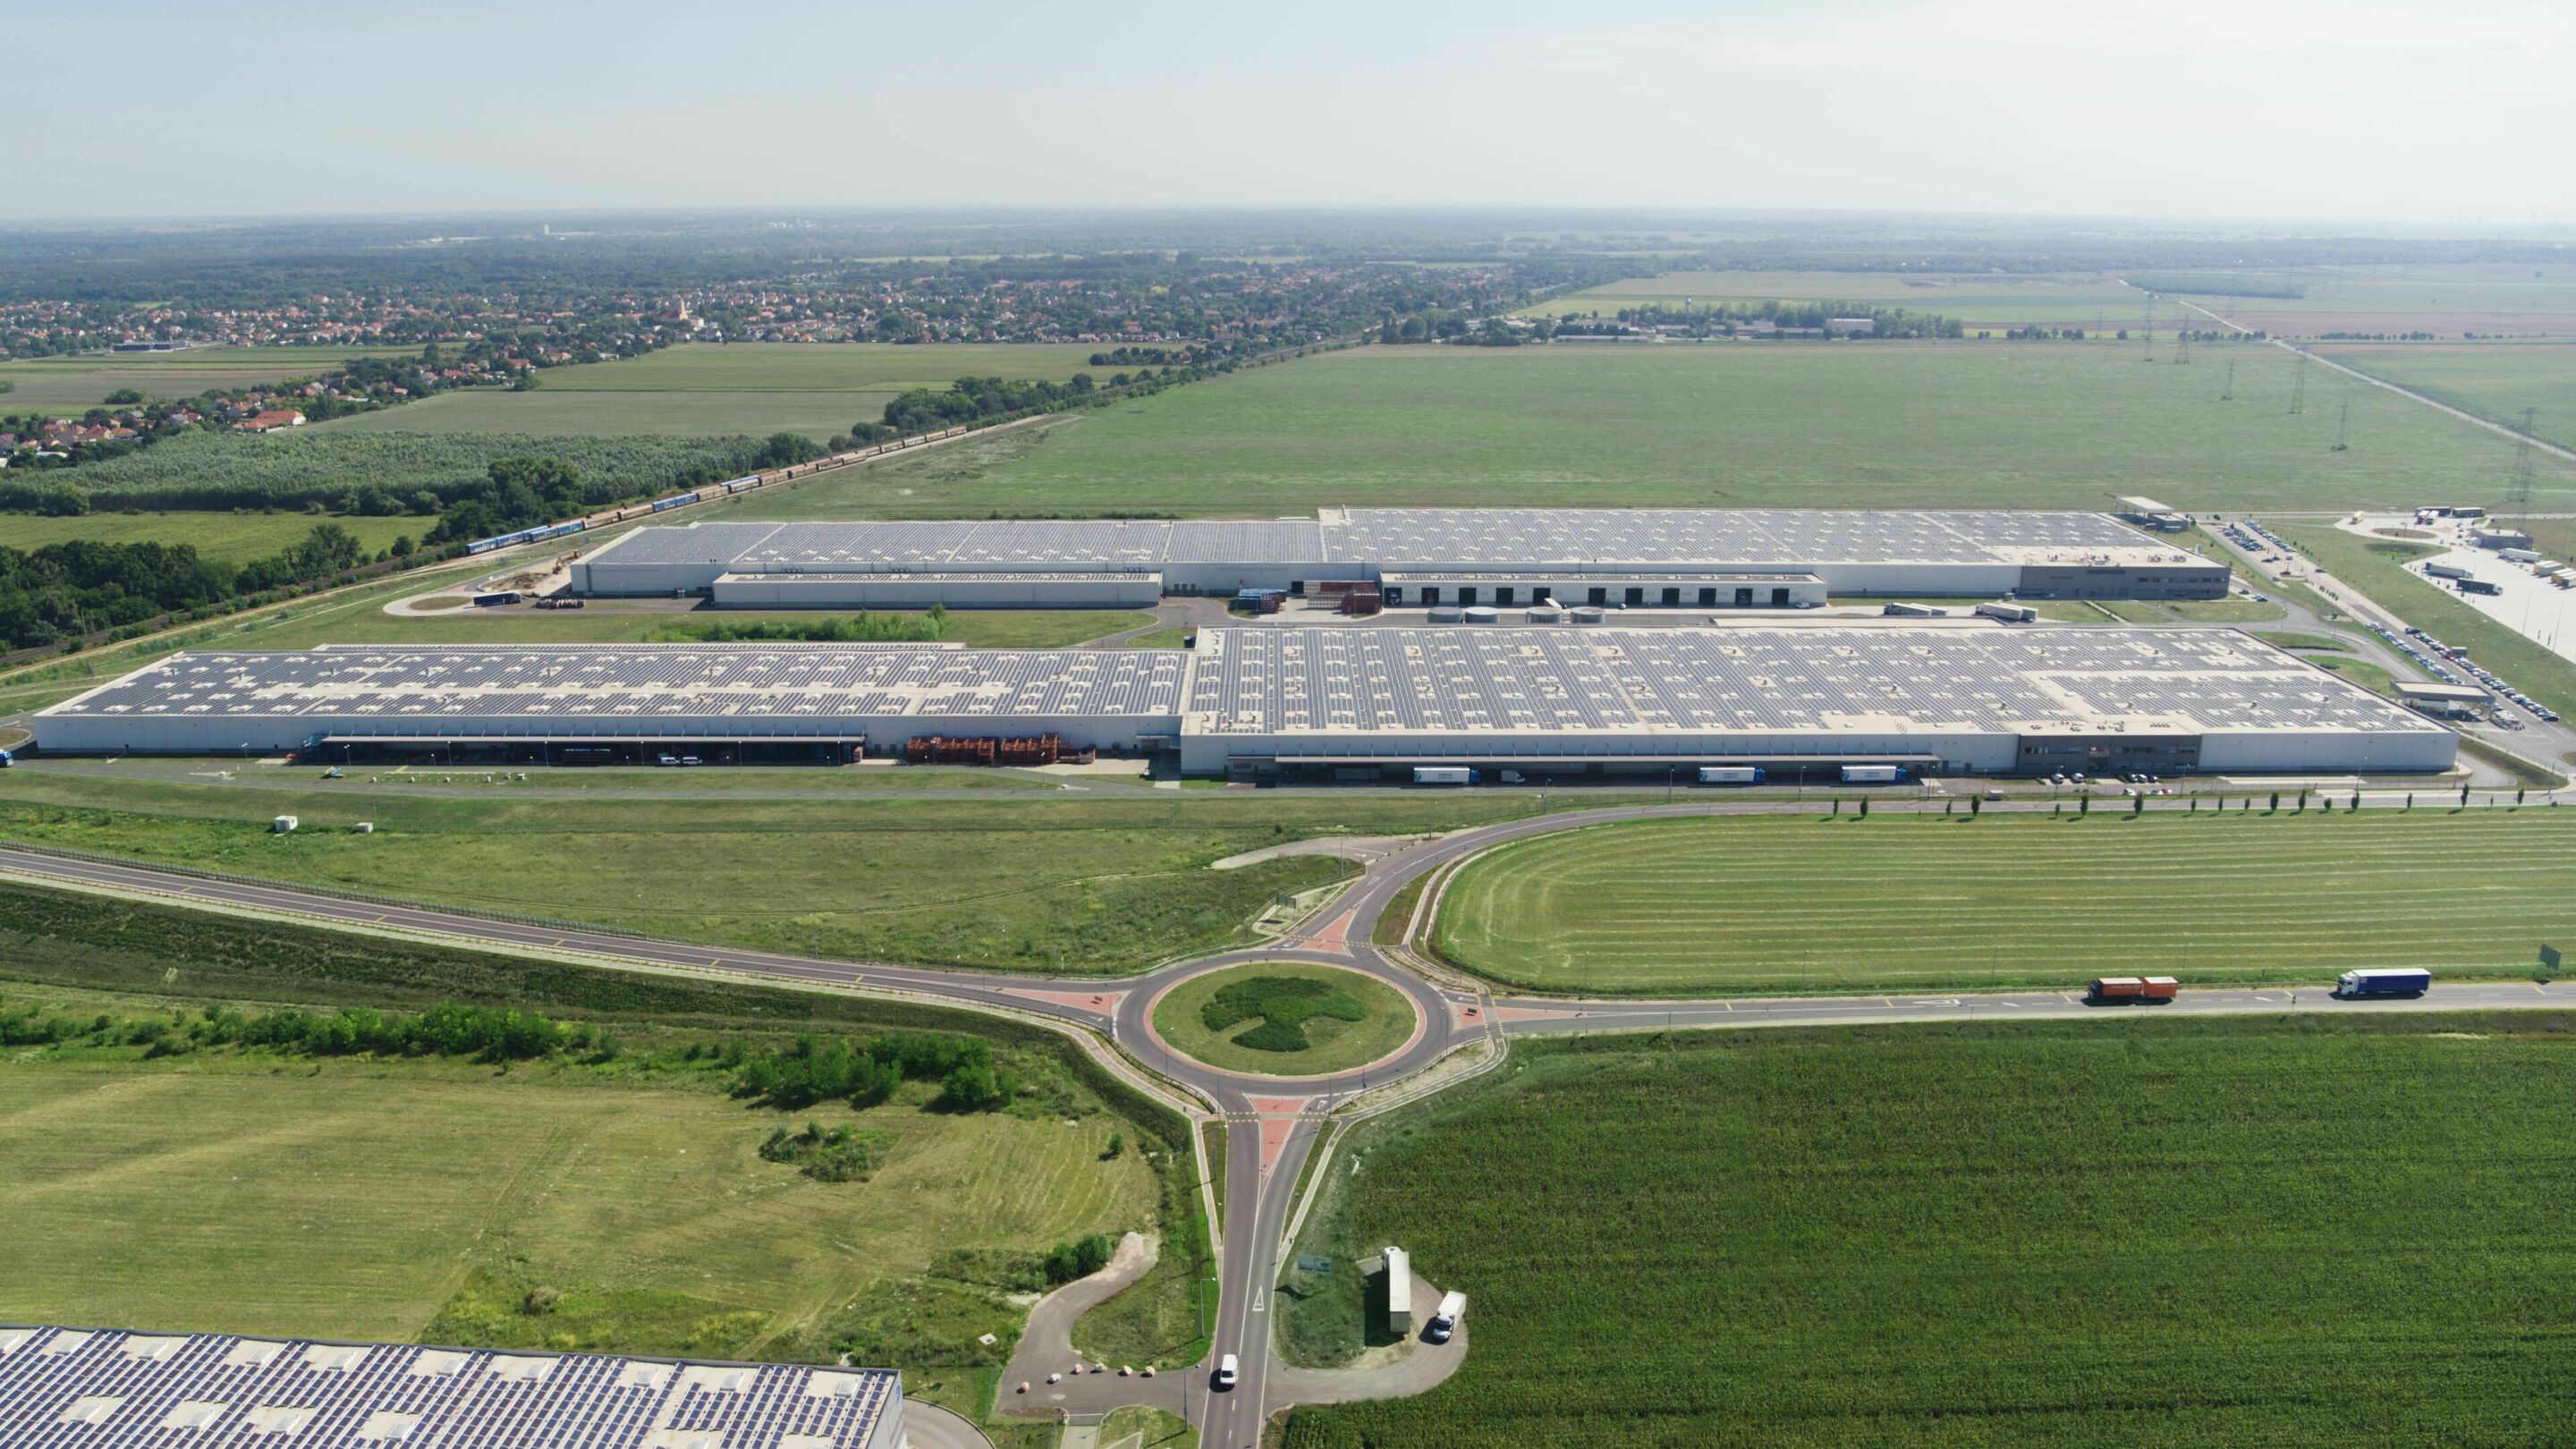 Audi Hungaria for a sustainable future